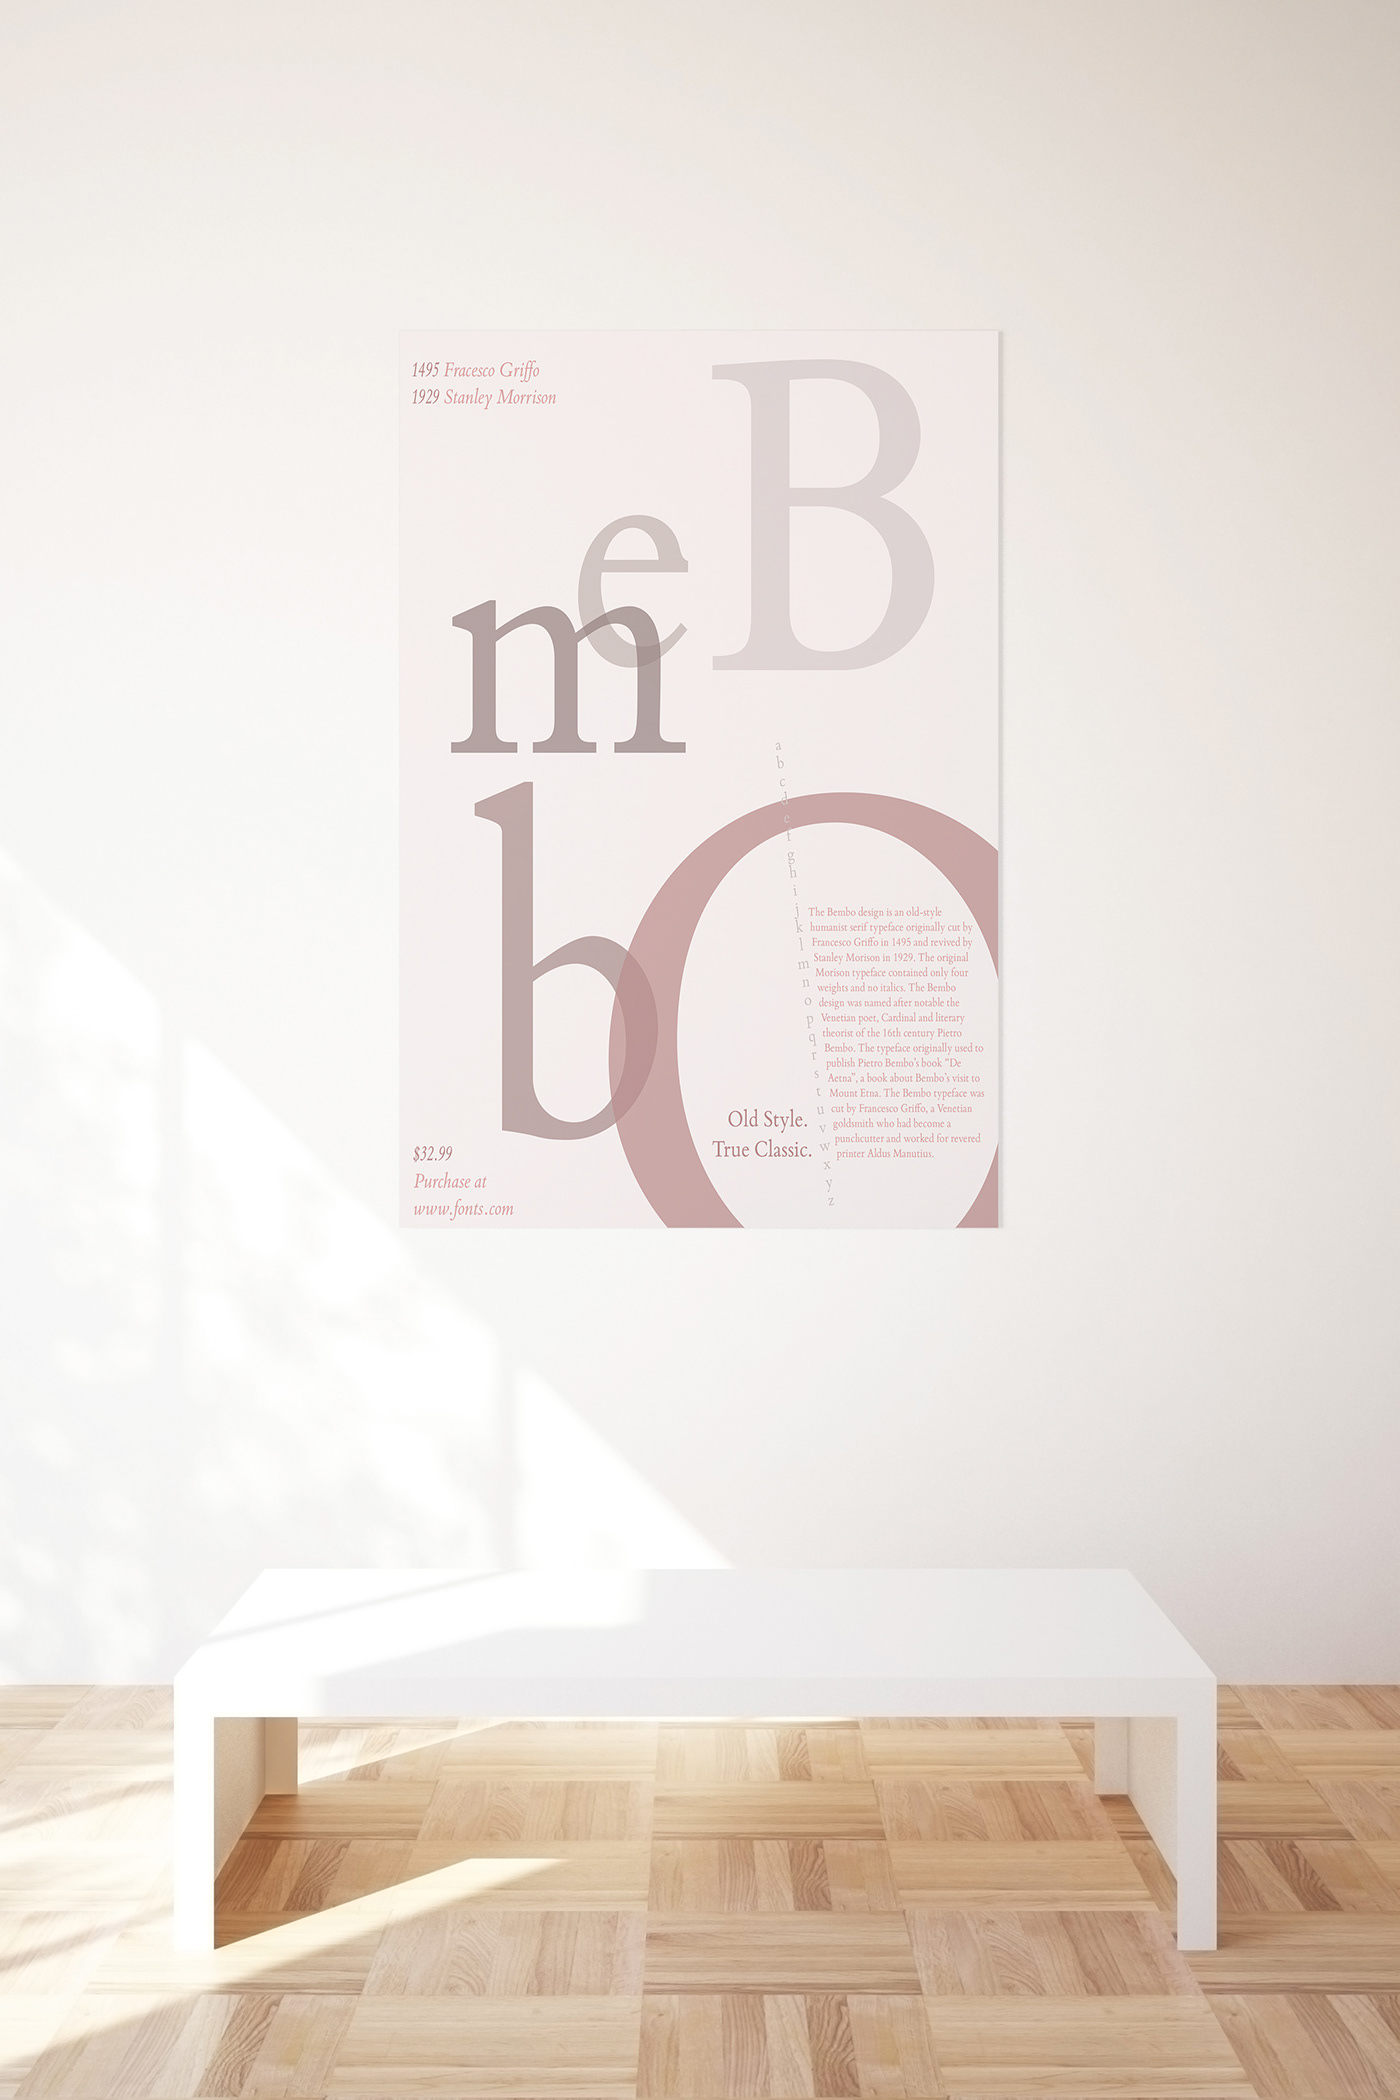 Bembo bembo book Bembo Book MT Pro design font graphic poster Typeface typography  